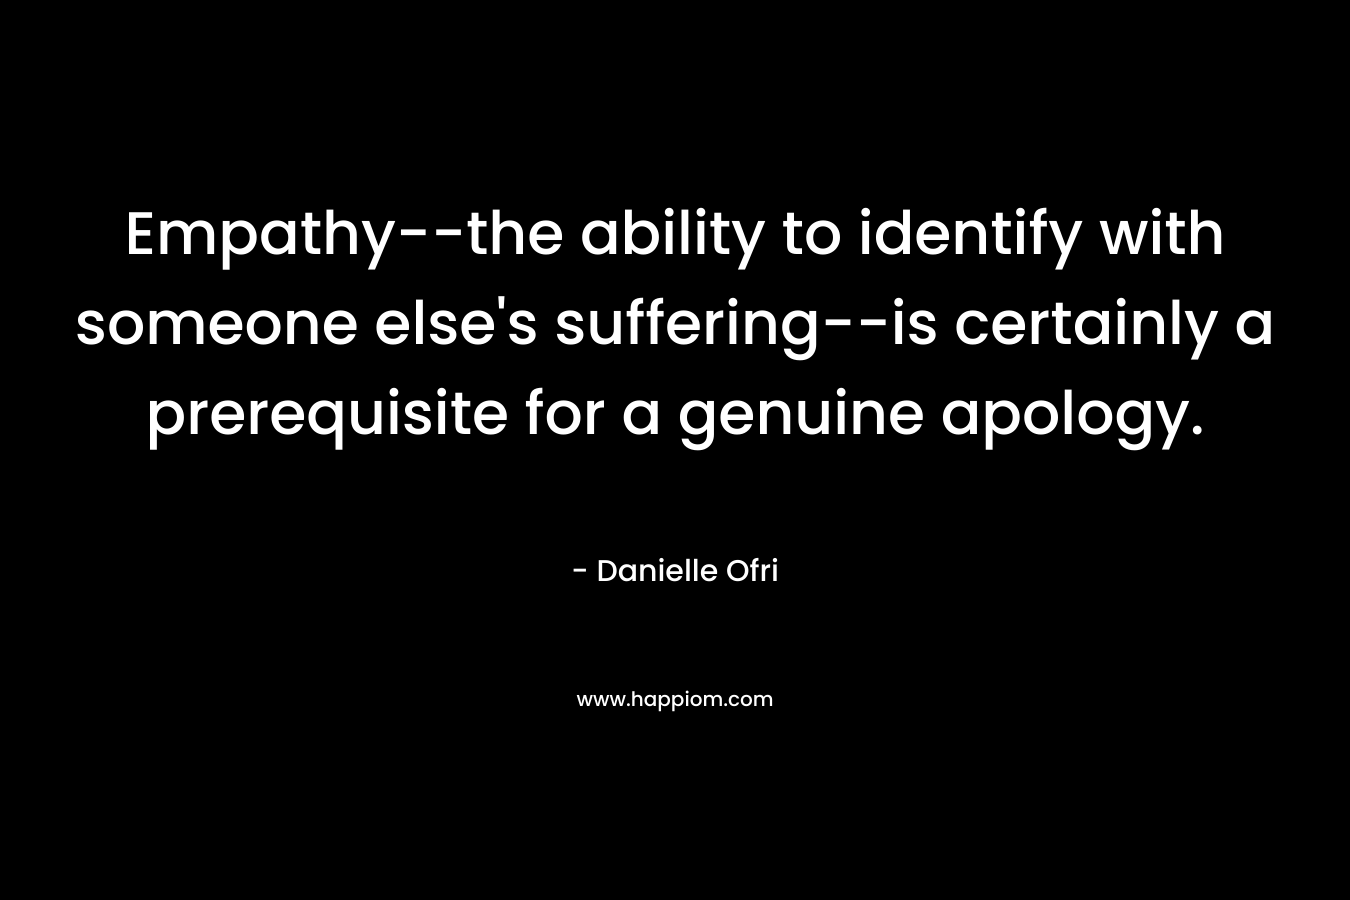 Empathy–the ability to identify with someone else’s suffering–is certainly a prerequisite for a genuine apology. – Danielle Ofri